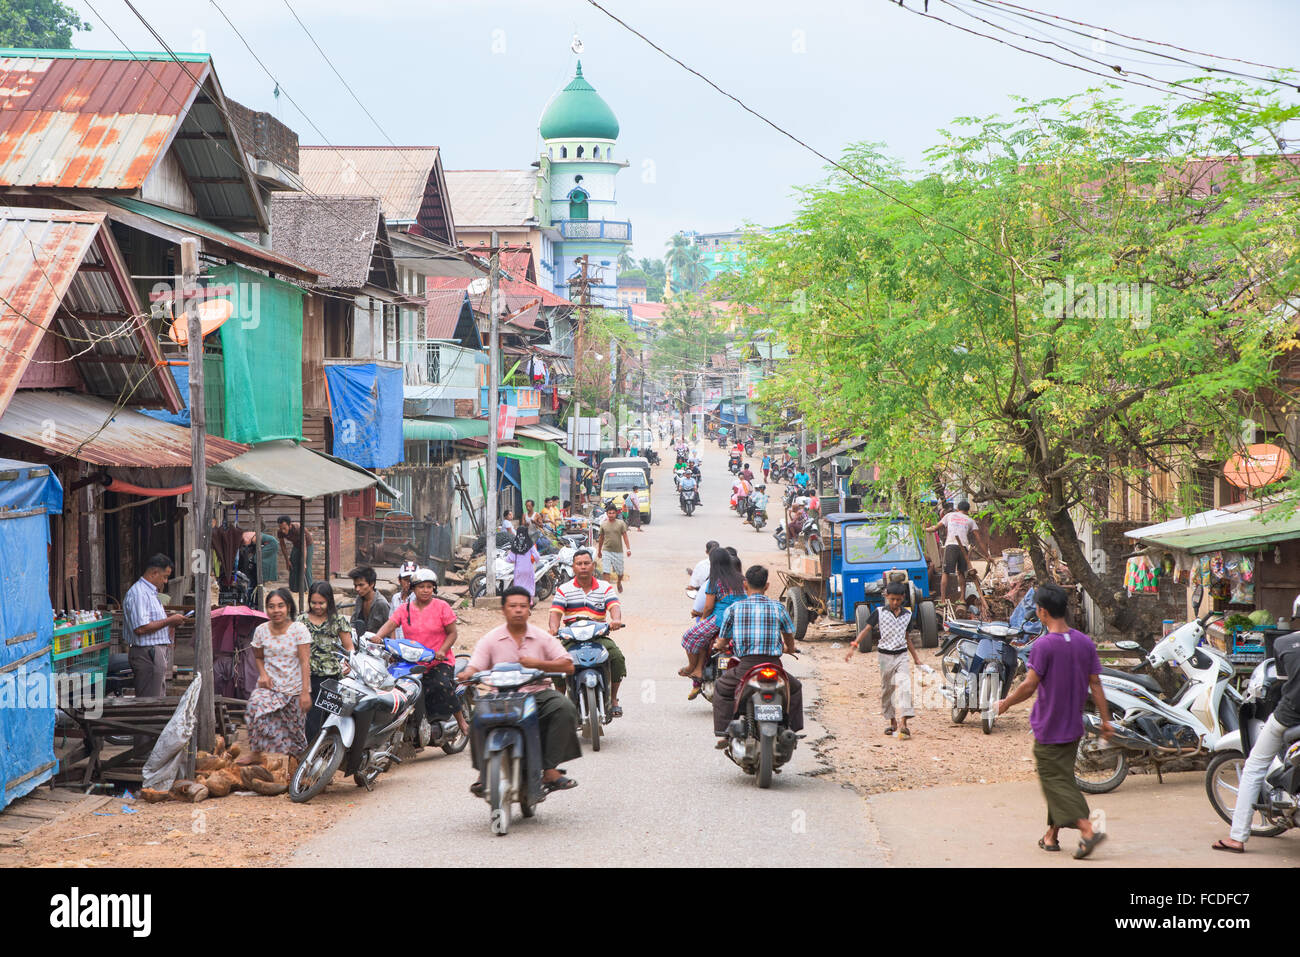 Street view with a mosque in the background in Myeik, a major city in Southern Myanmar. Some motion blur on moving vehicles. Stock Photo